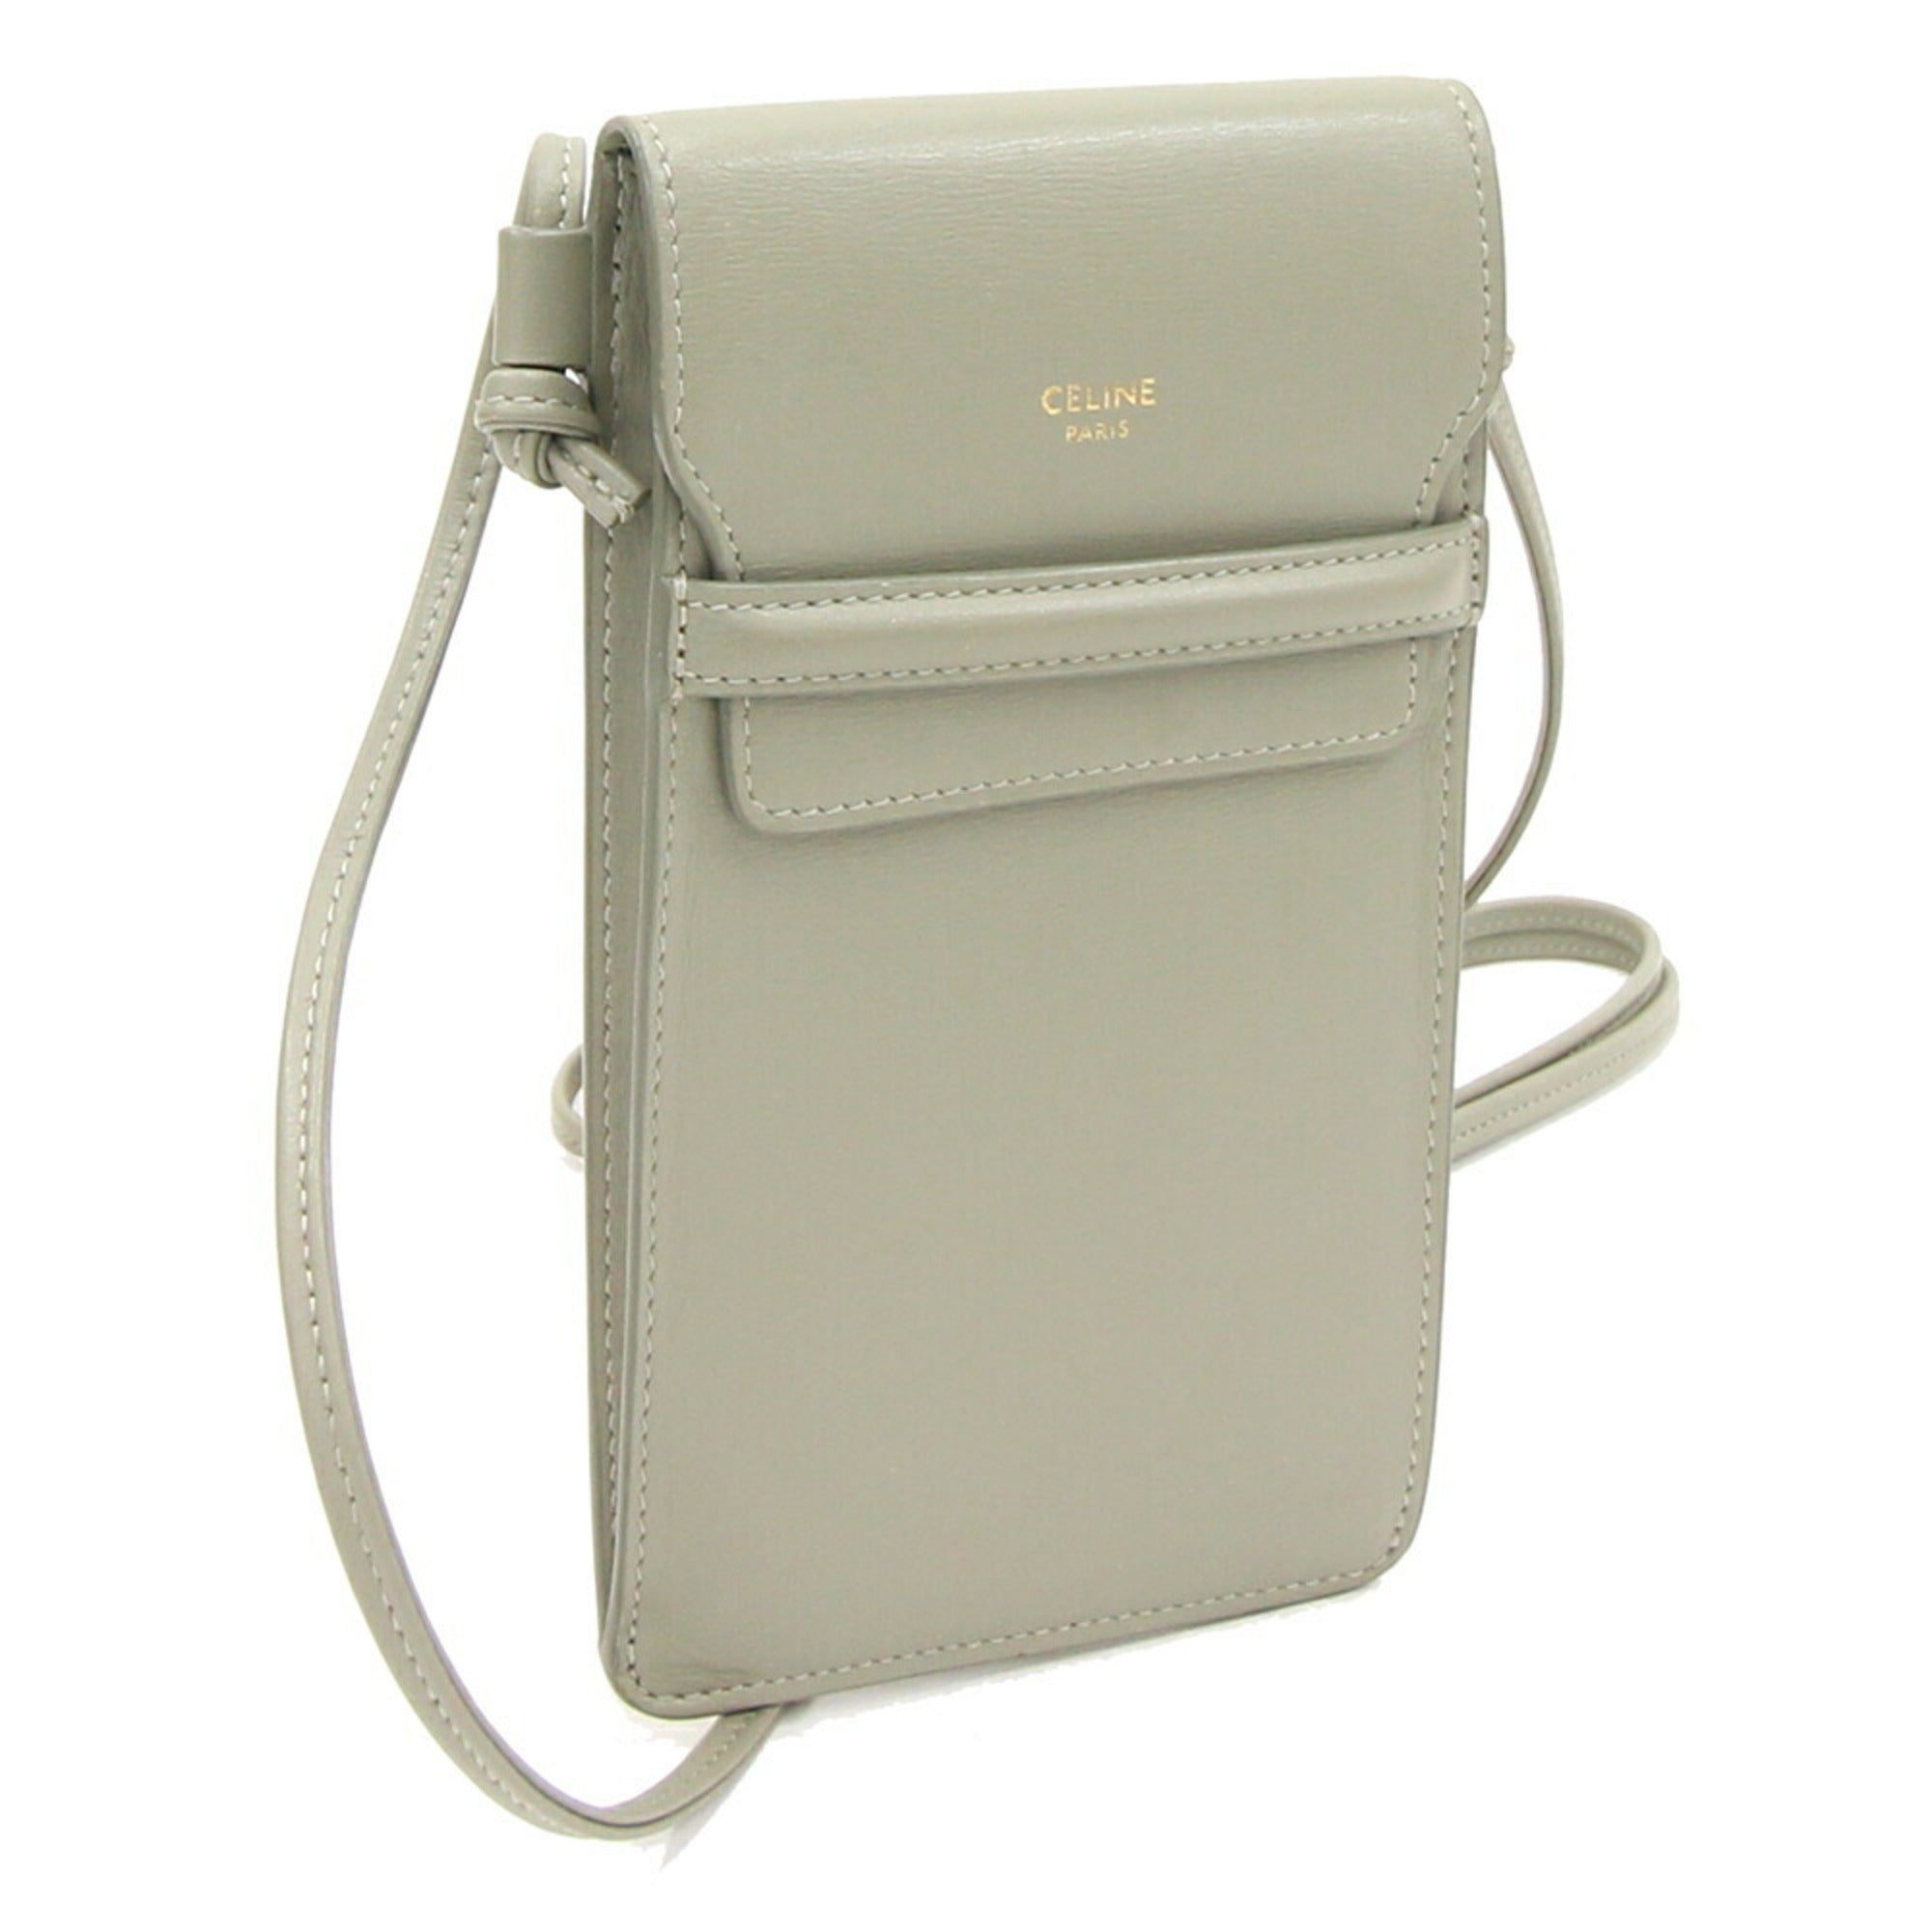 CELINE Shoulder Bag Green Clay Leather Women's Phone Pouch